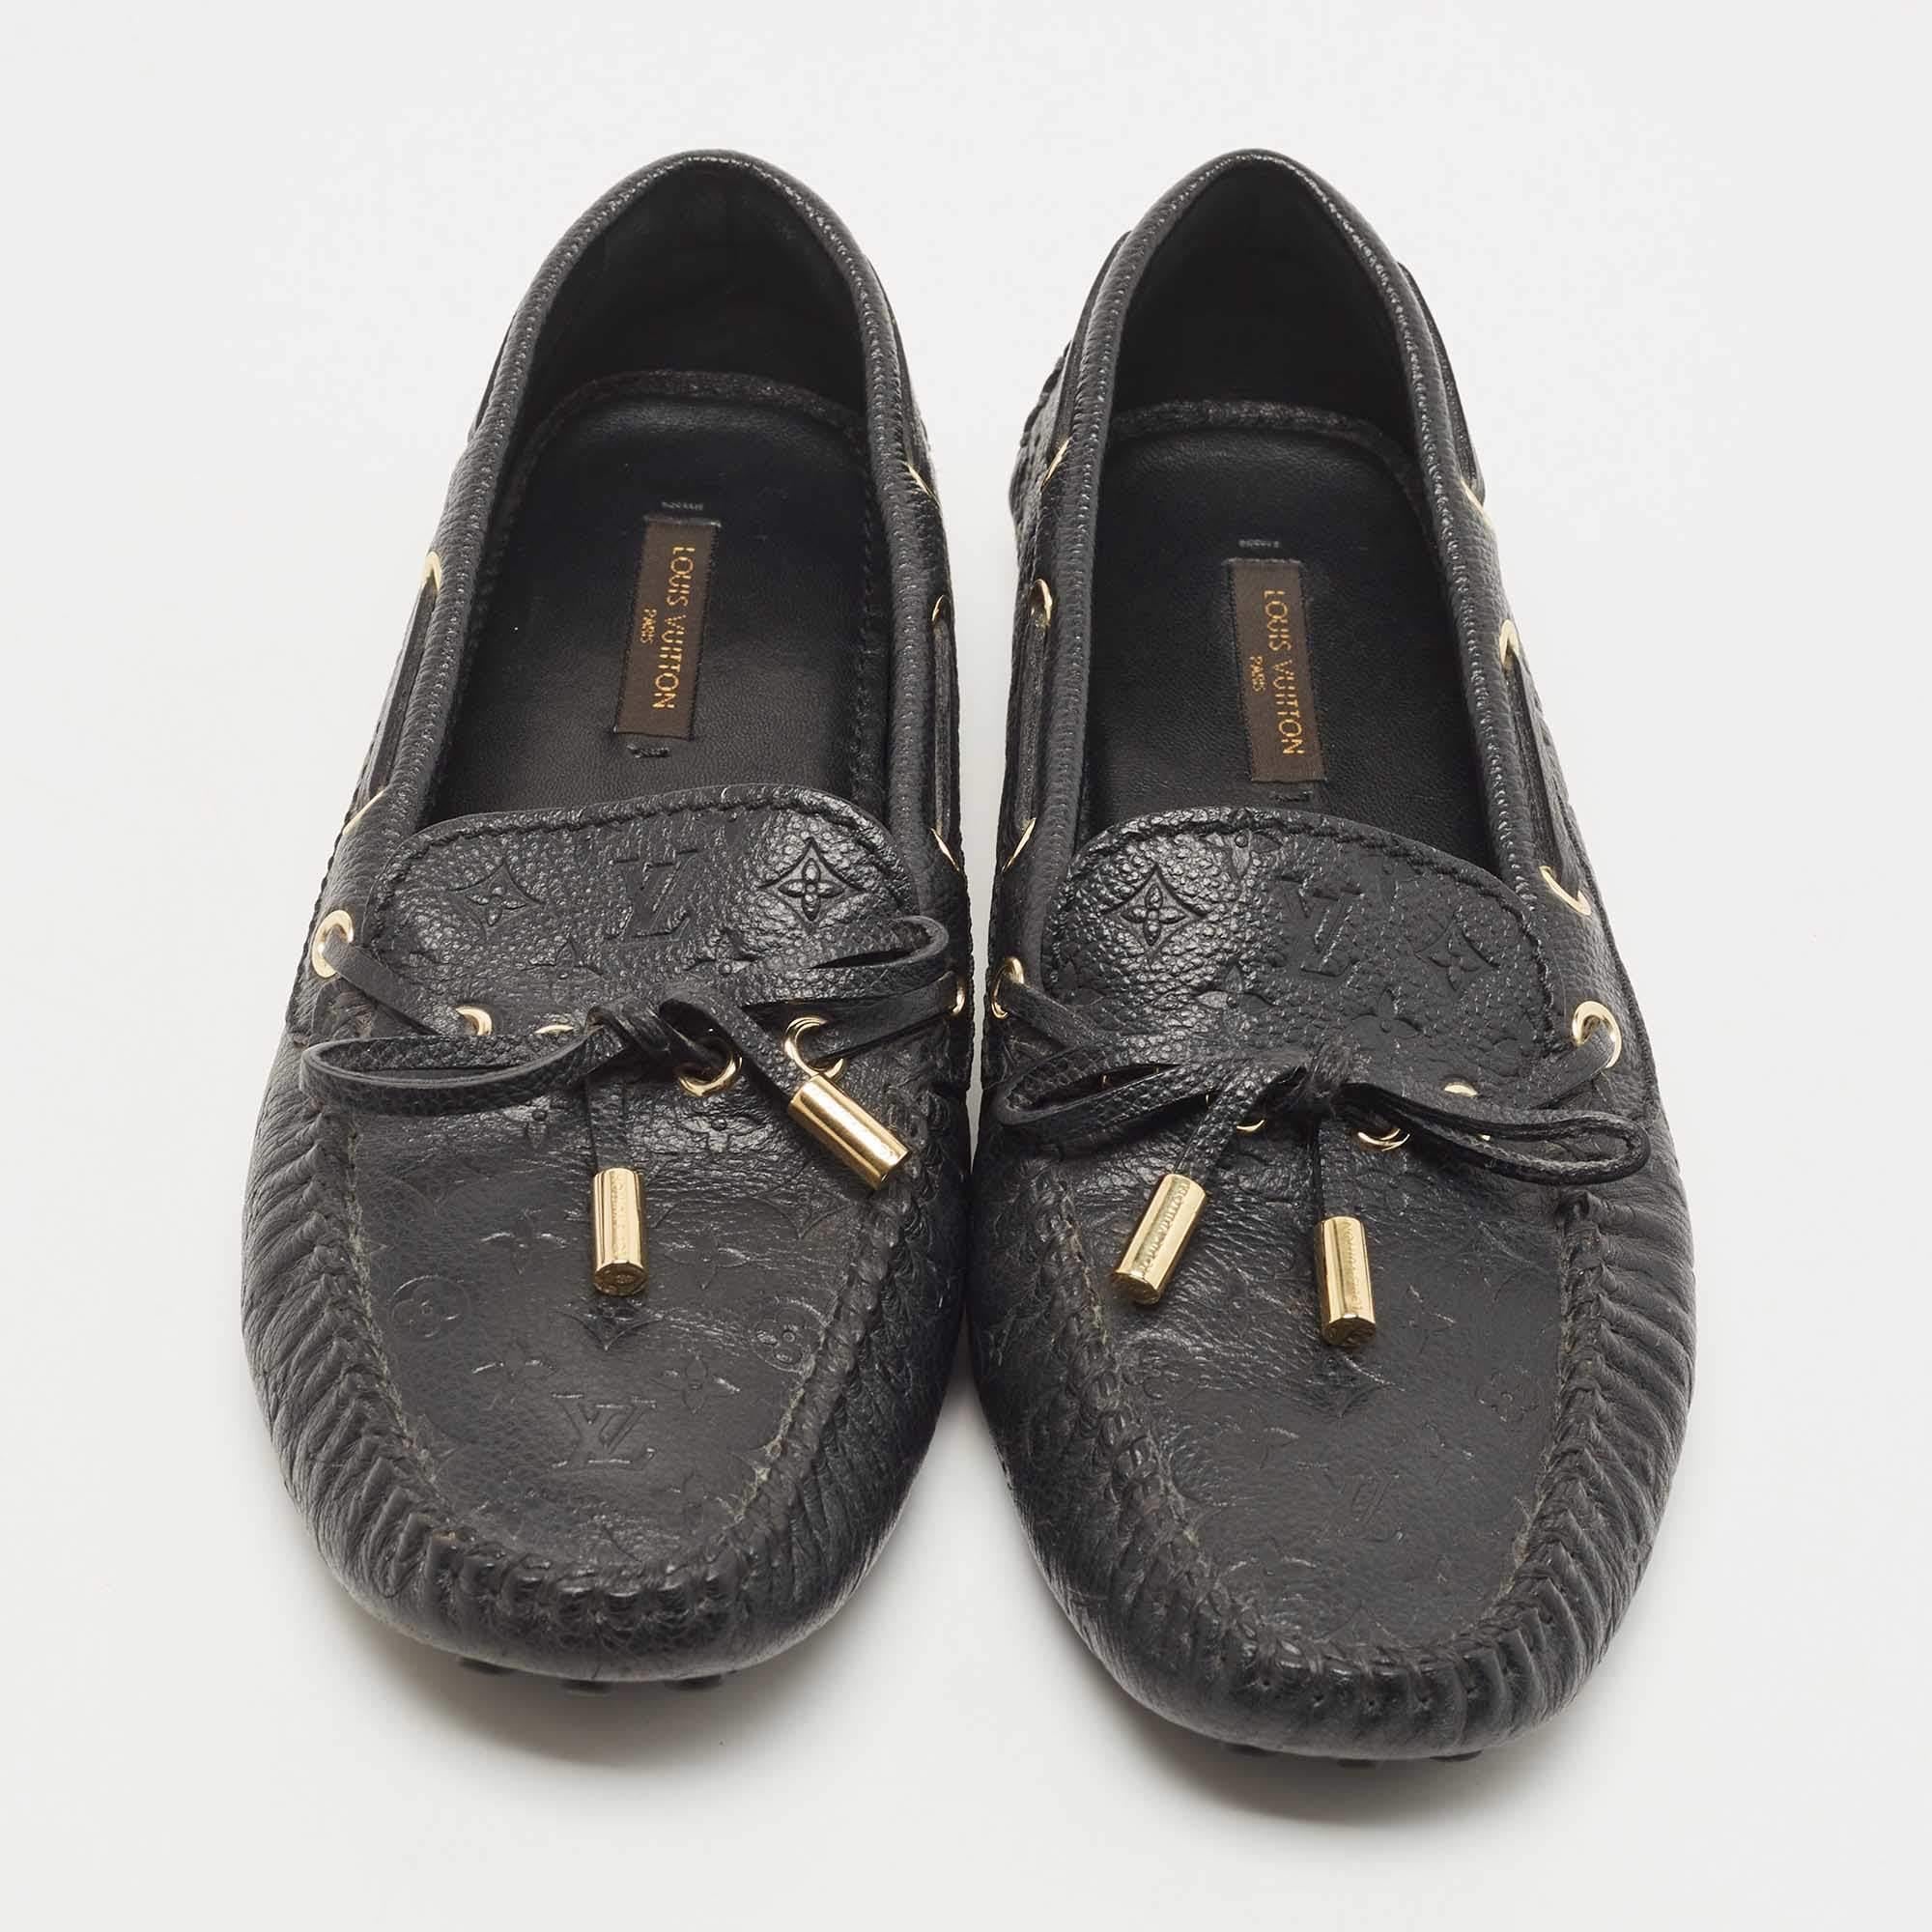 To perfectly complement your attires, we bring you this pair of loafers that speak nothing but style. The shoes have been crafted with skill and are designed to be easy to slip on. They are just the right choice to complement your fashionable